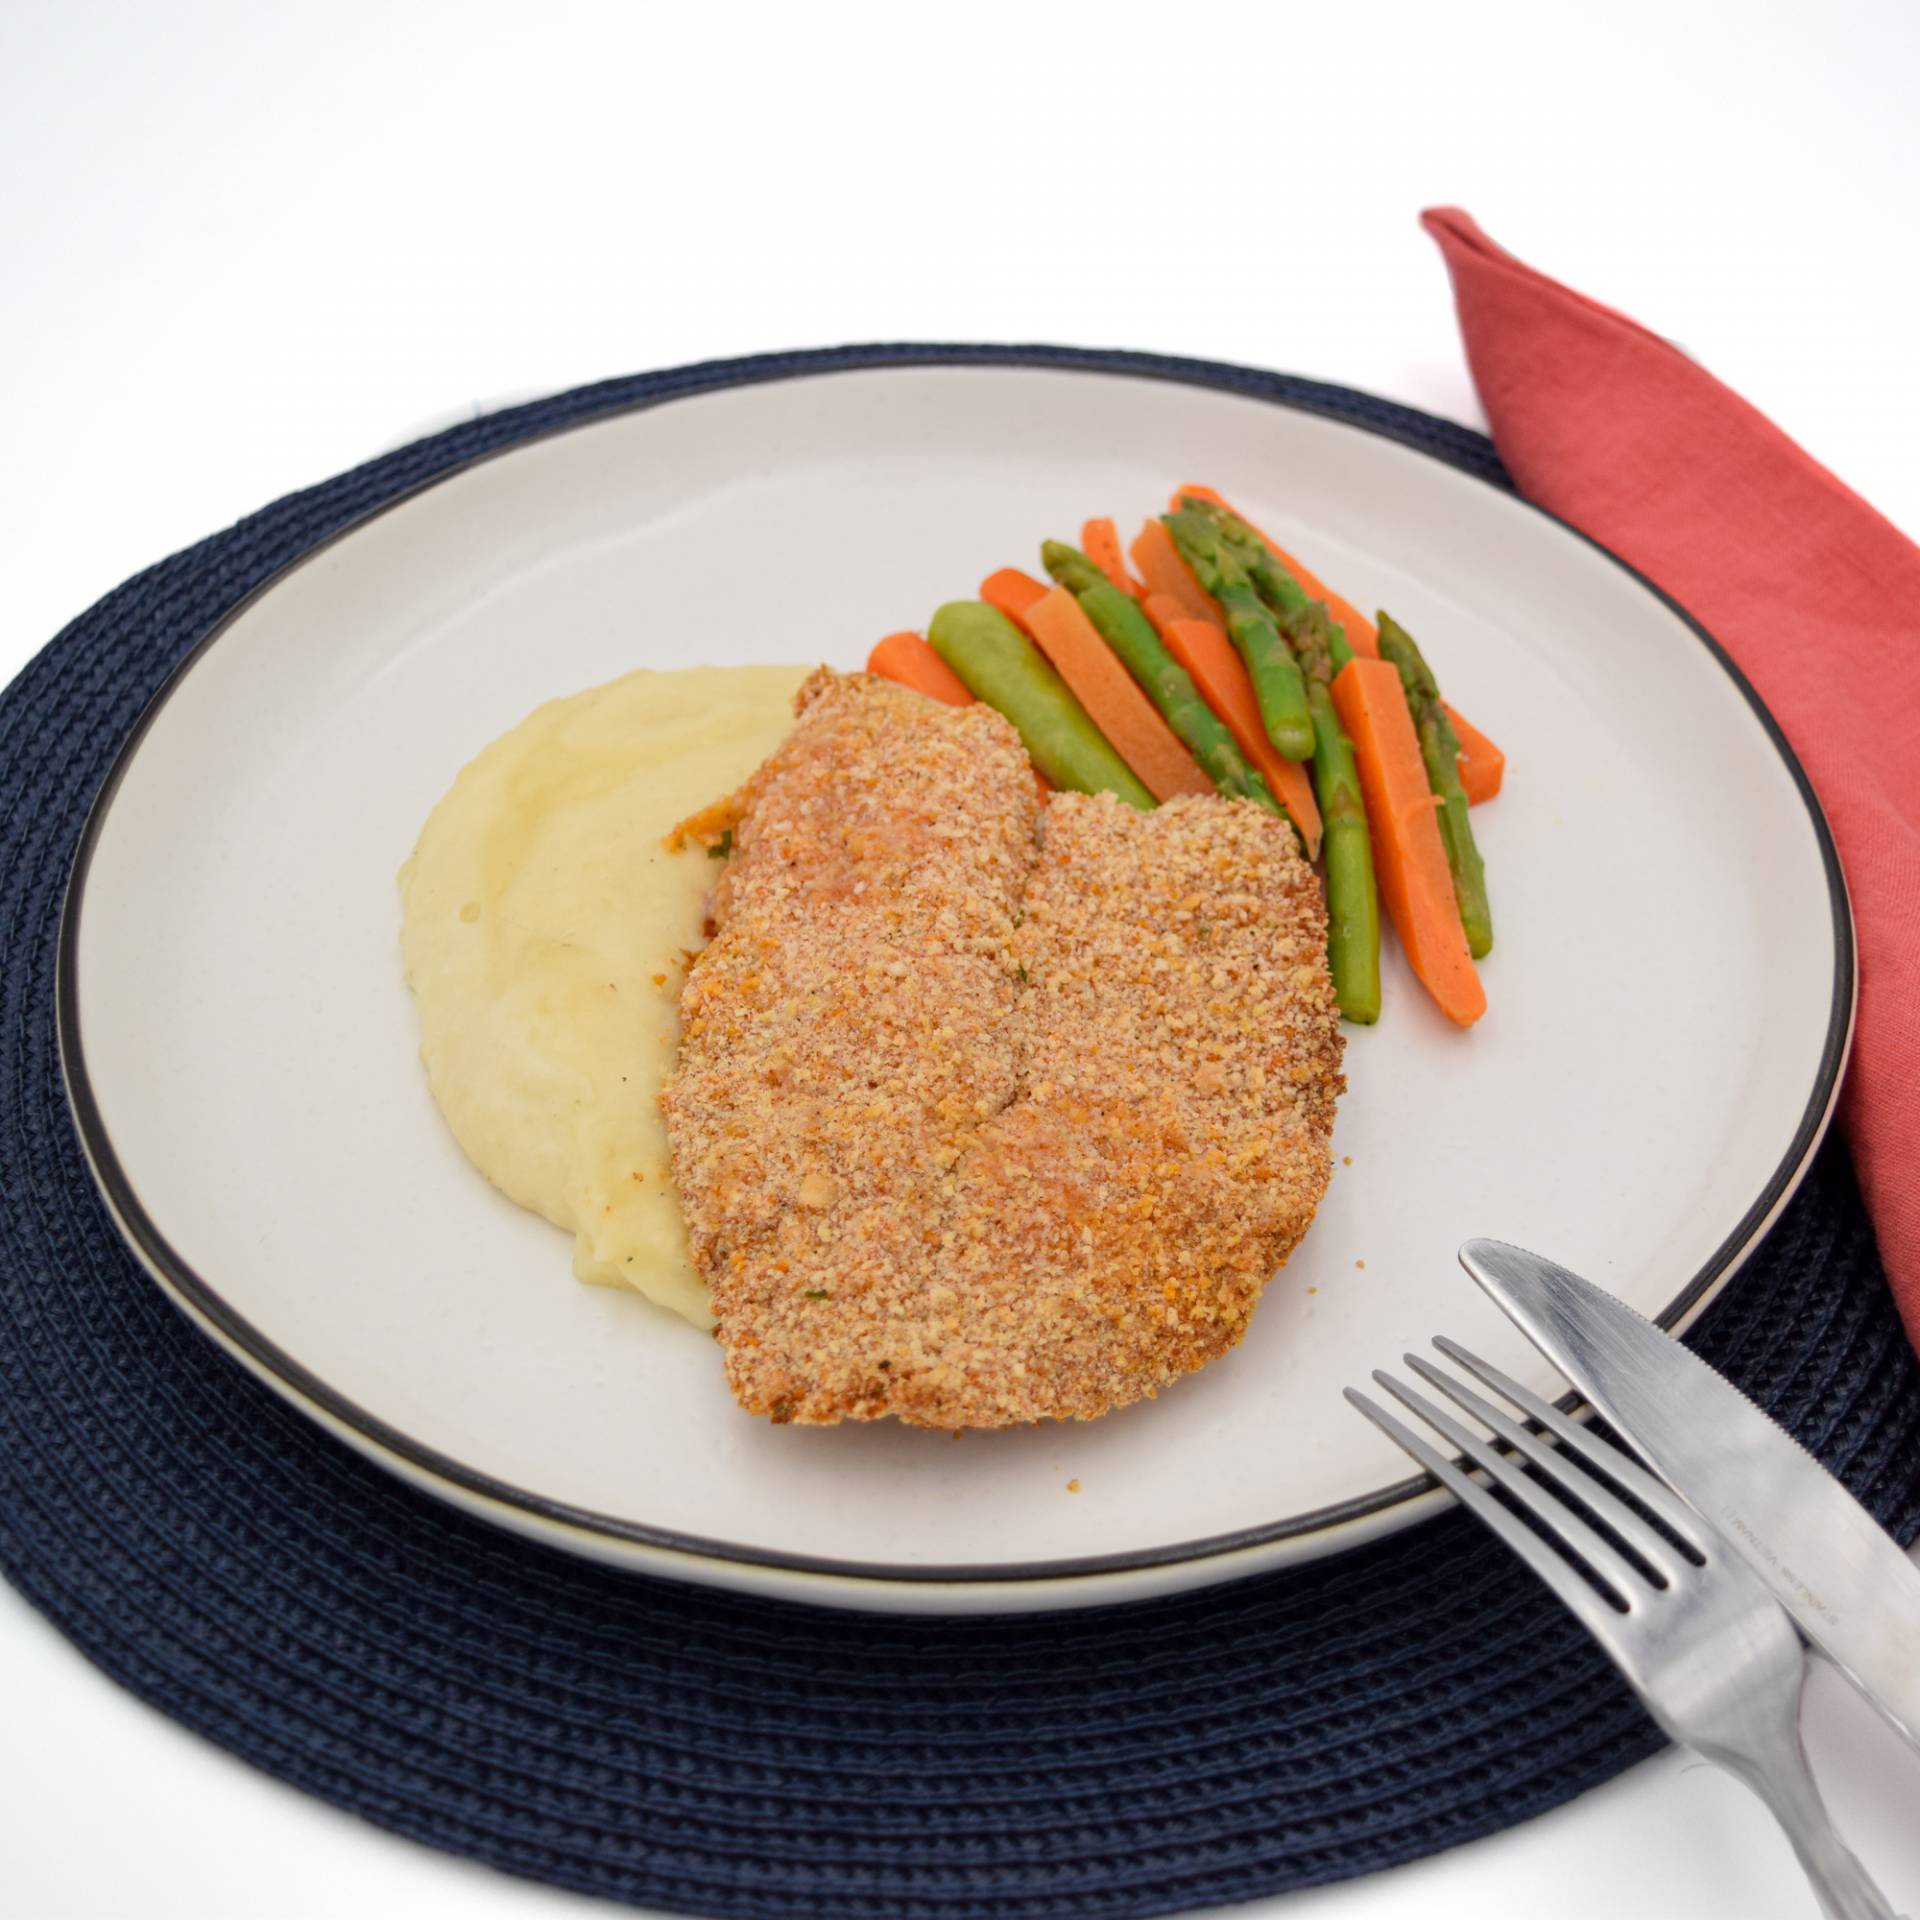 Panko crusted tilapia with yucca mash, carrots and asparagus